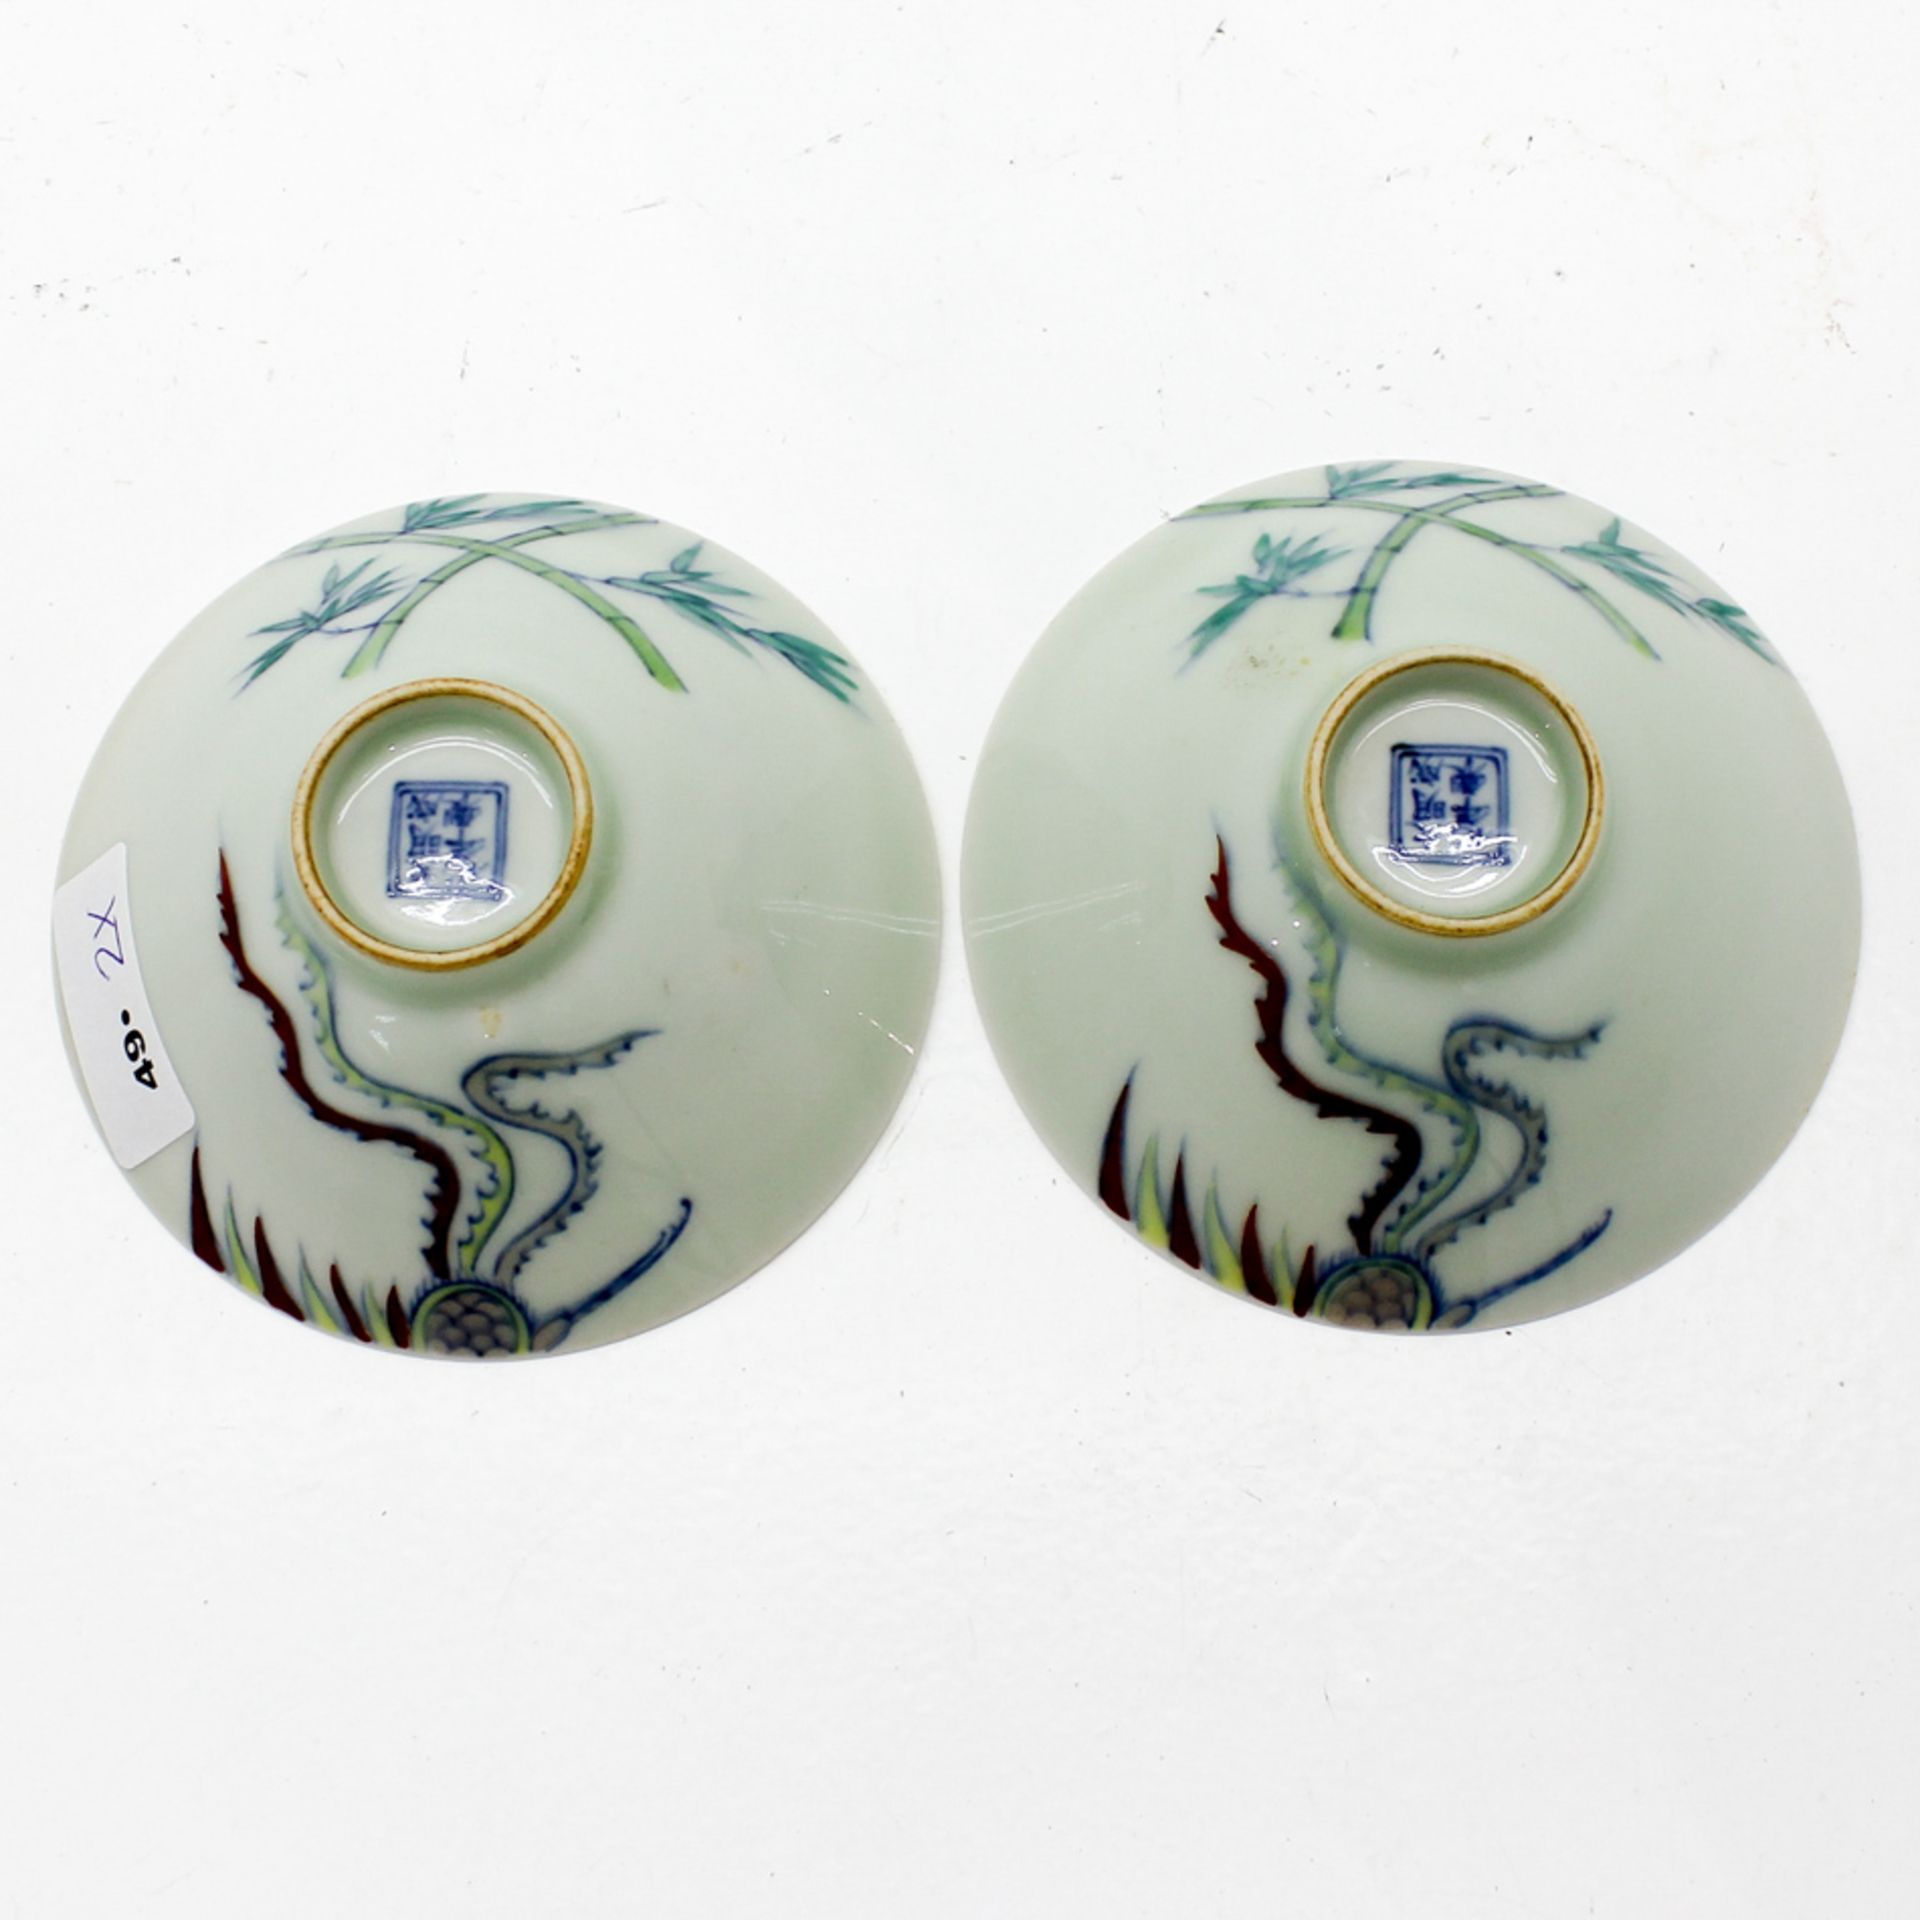 Lot of 2 China Porcelain Small Bowls In bamboo decor, marked with 6 Chinese characters on bottom, - Bild 3 aus 3